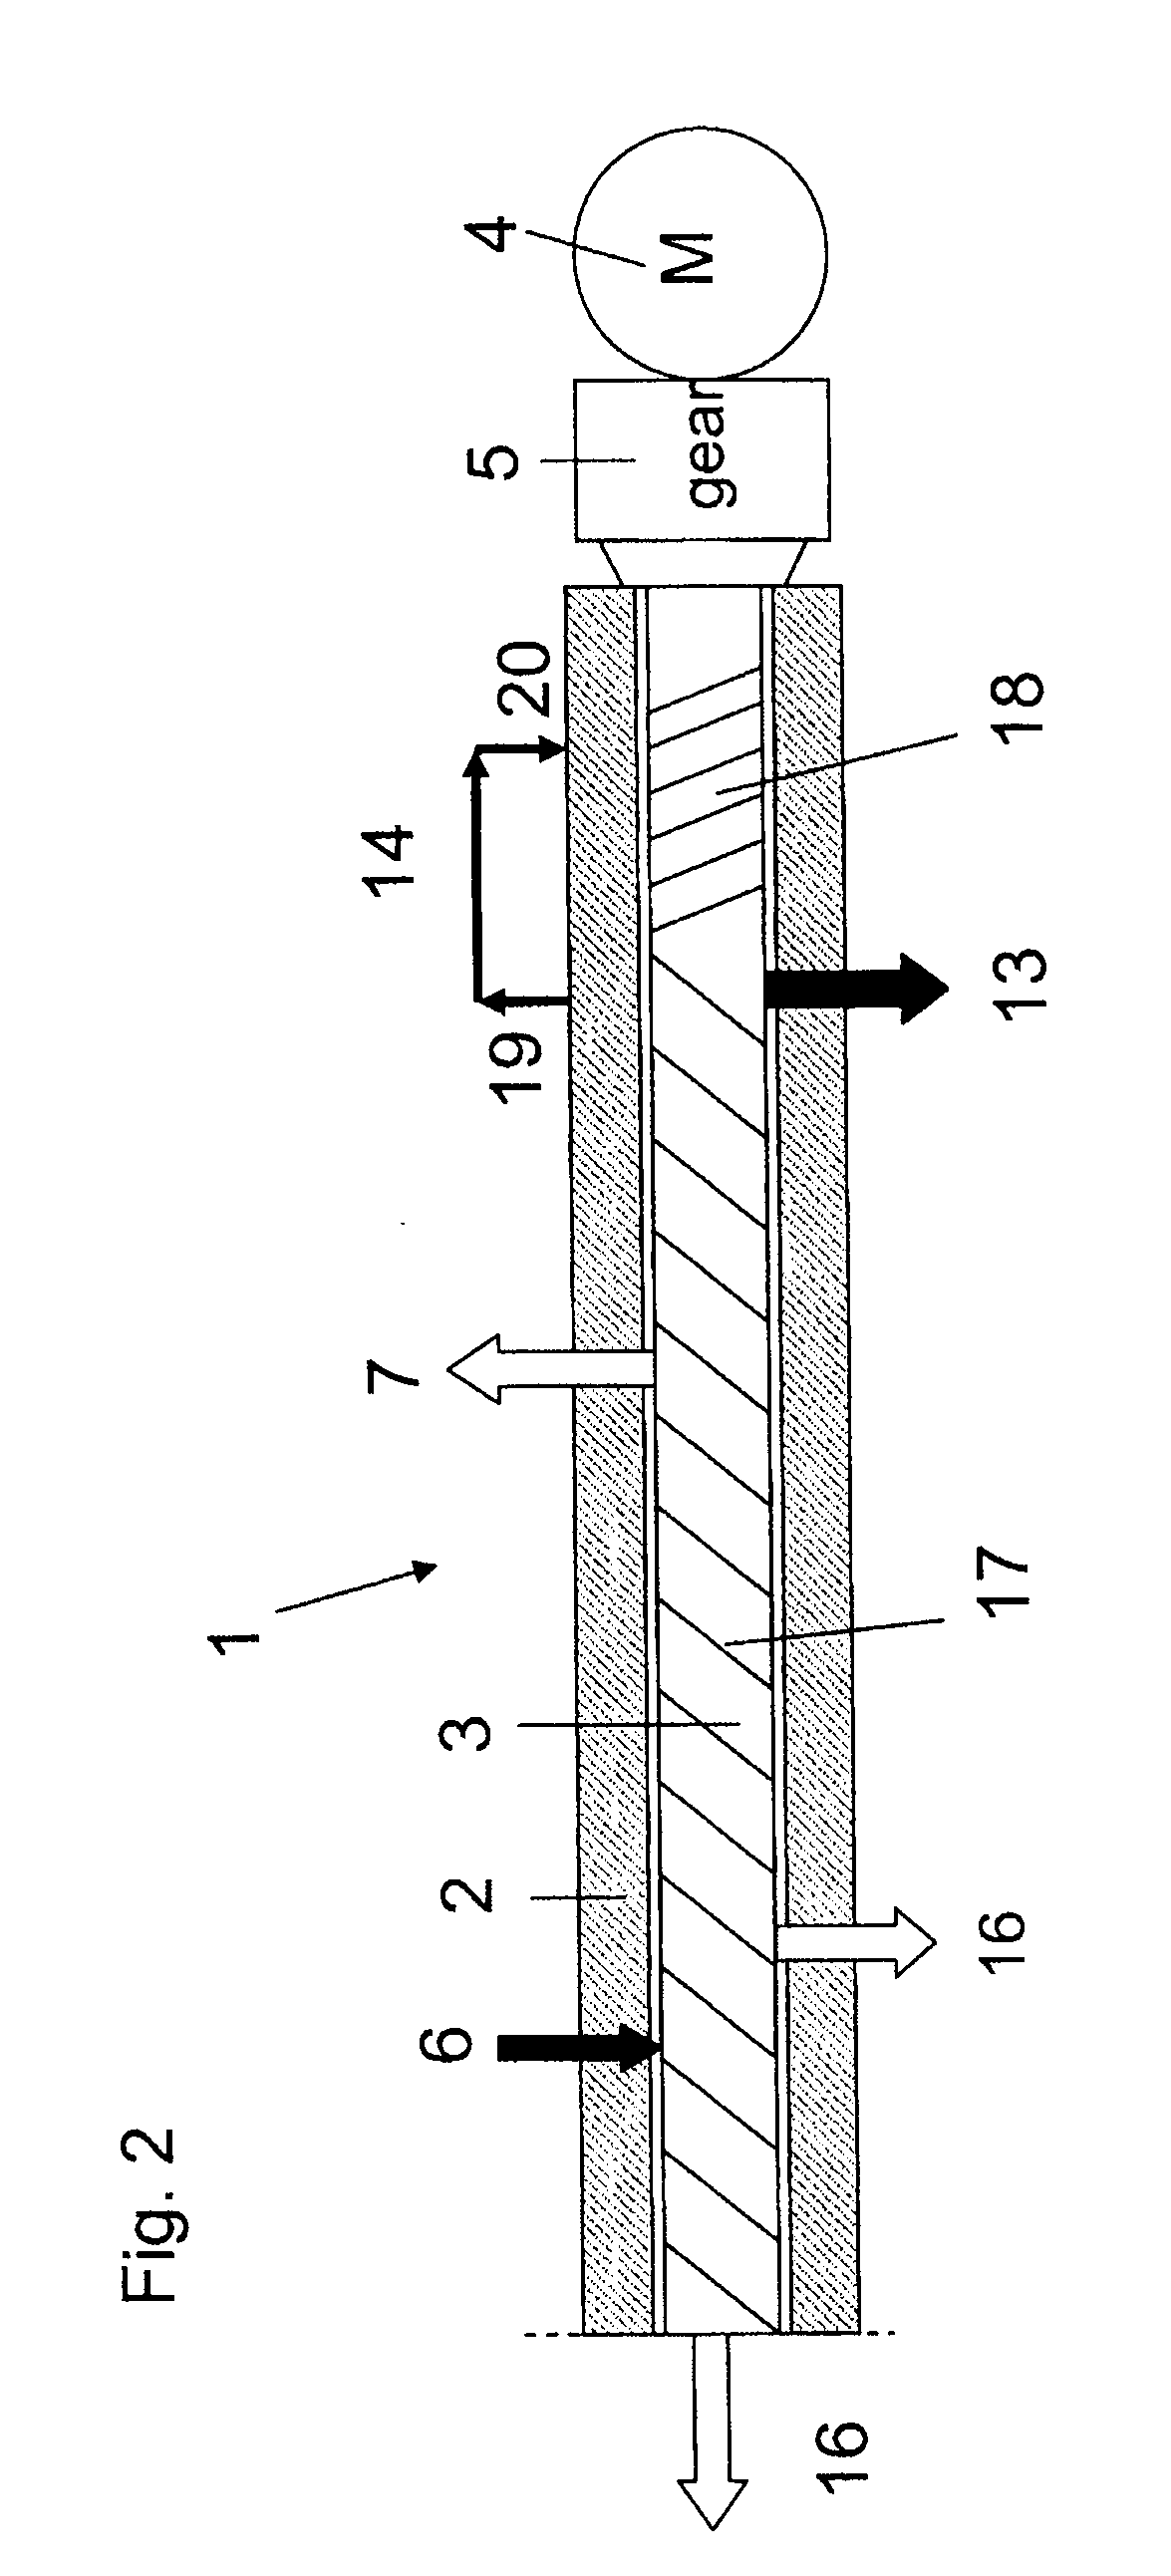 Degassing extruder for degassing a polymer material and method for degassing a syrup consisting of polymers, solvents and/or monomers using a degassing extruder